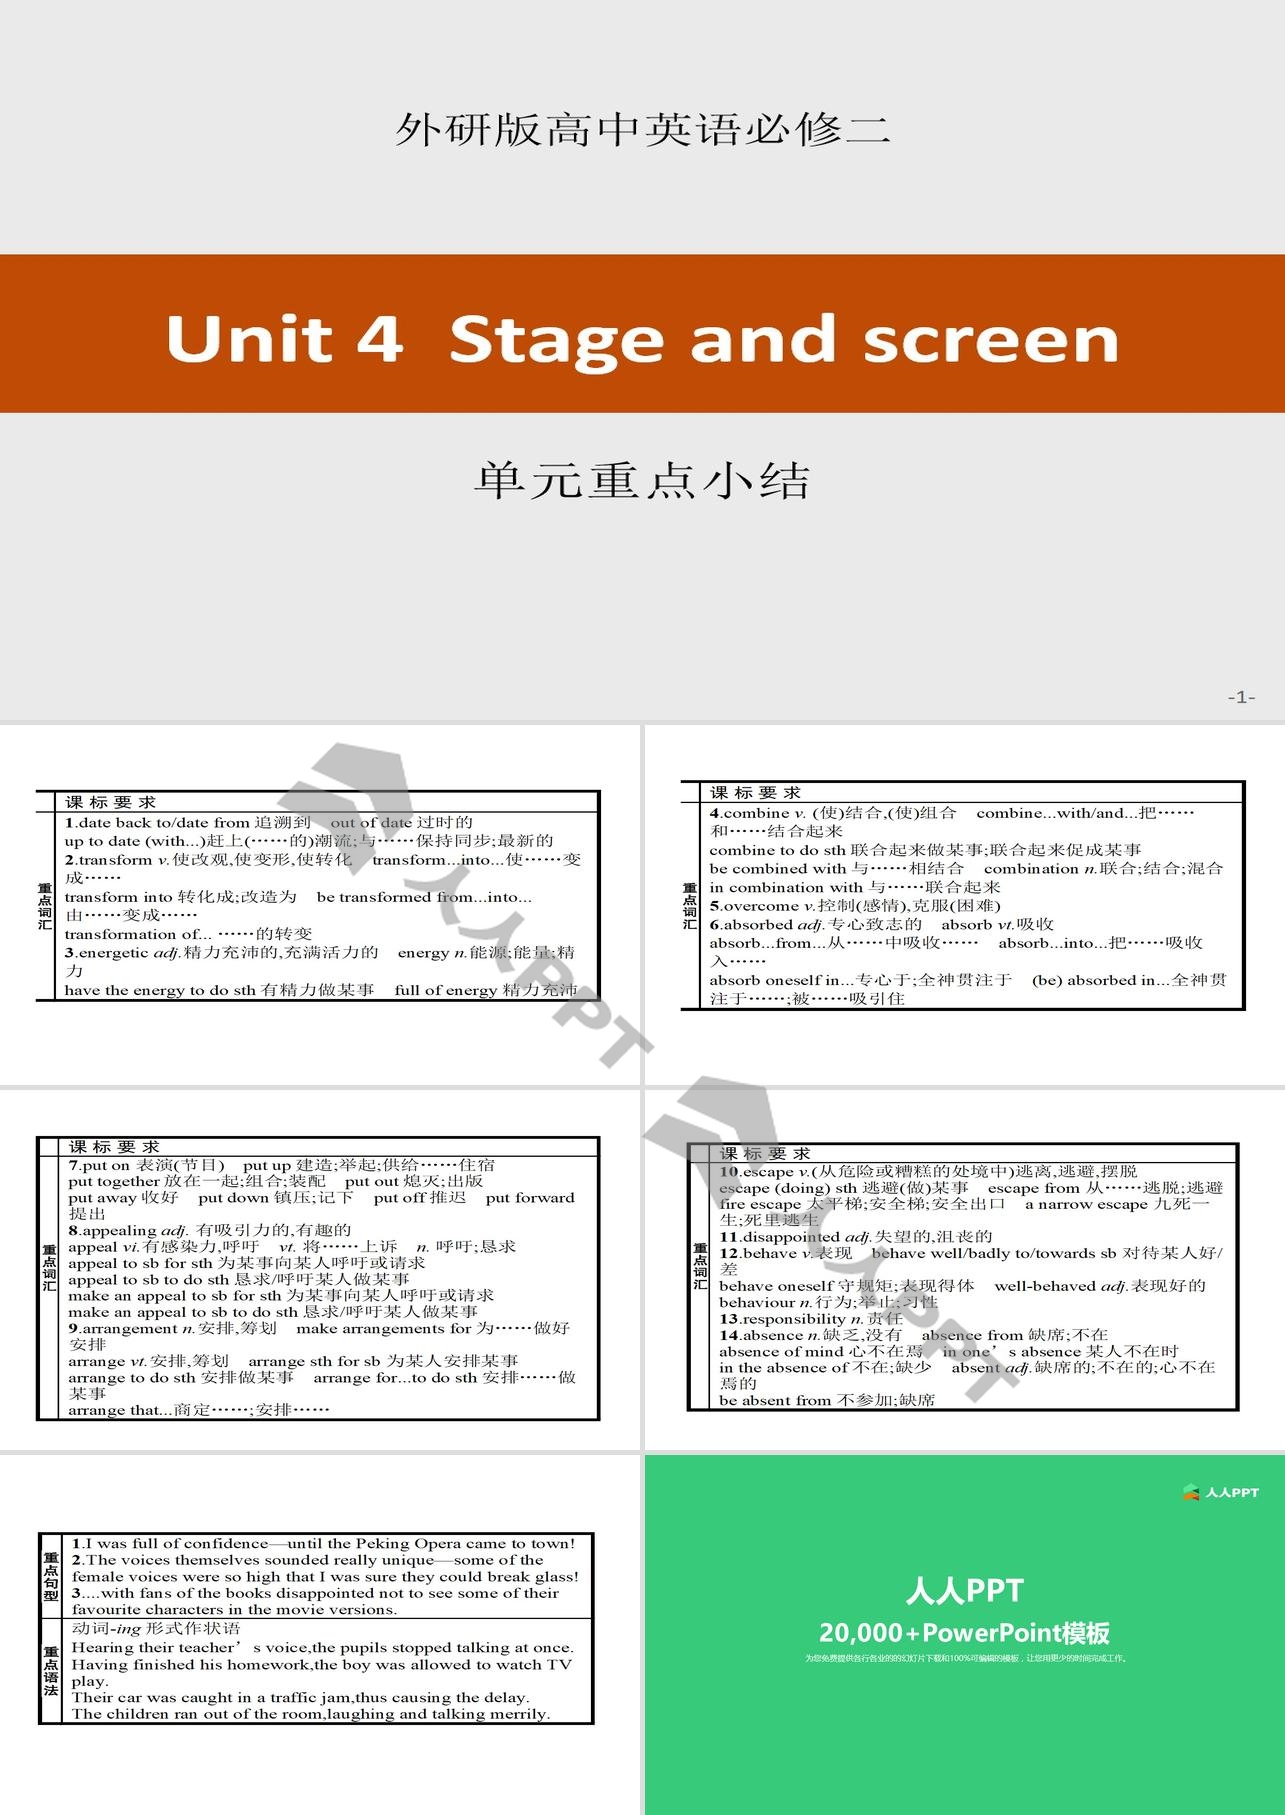 《Stage and screen》单元重点小结PPT长图